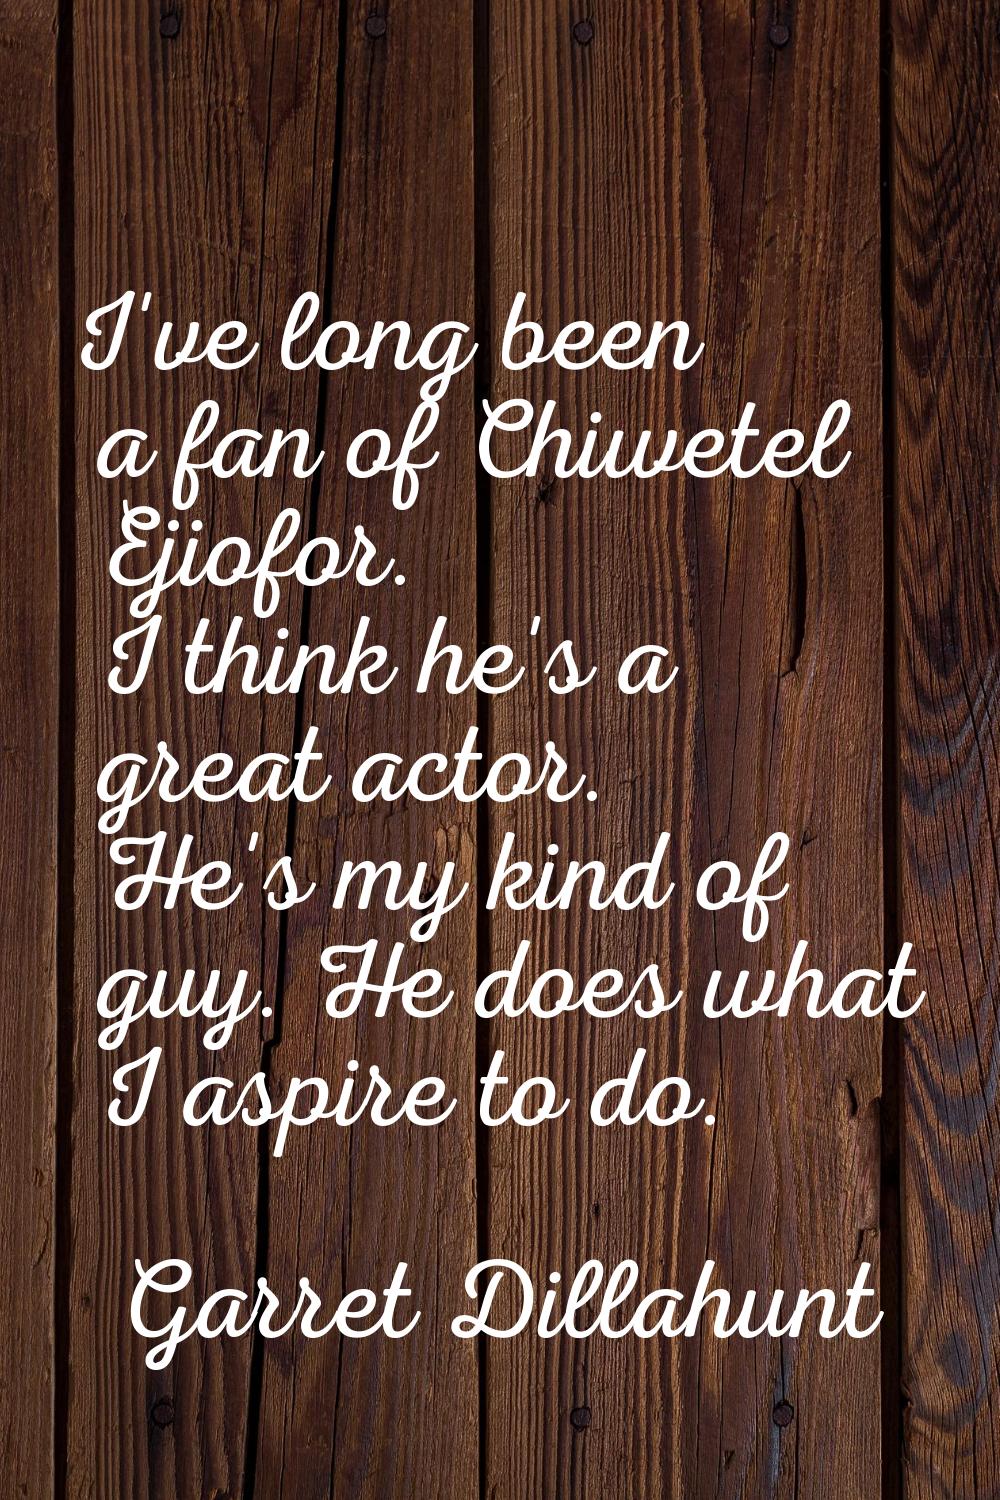 I've long been a fan of Chiwetel Ejiofor. I think he's a great actor. He's my kind of guy. He does 